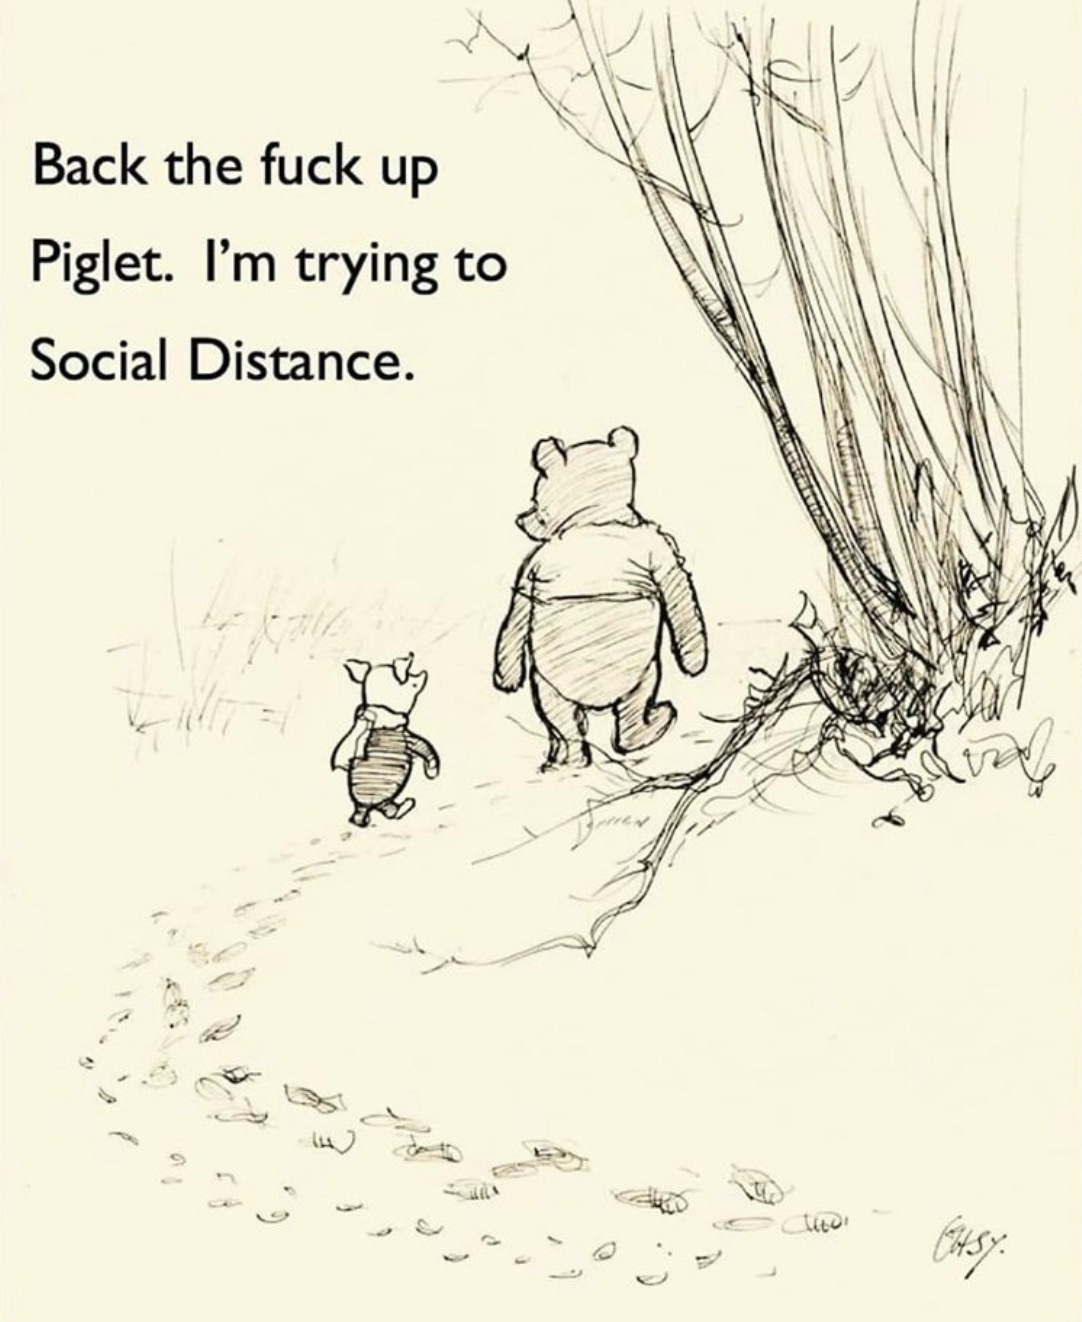 Pooh and Piglet walk into the woods, Pooh telling Piglet to pack up; he's trying to social distance.